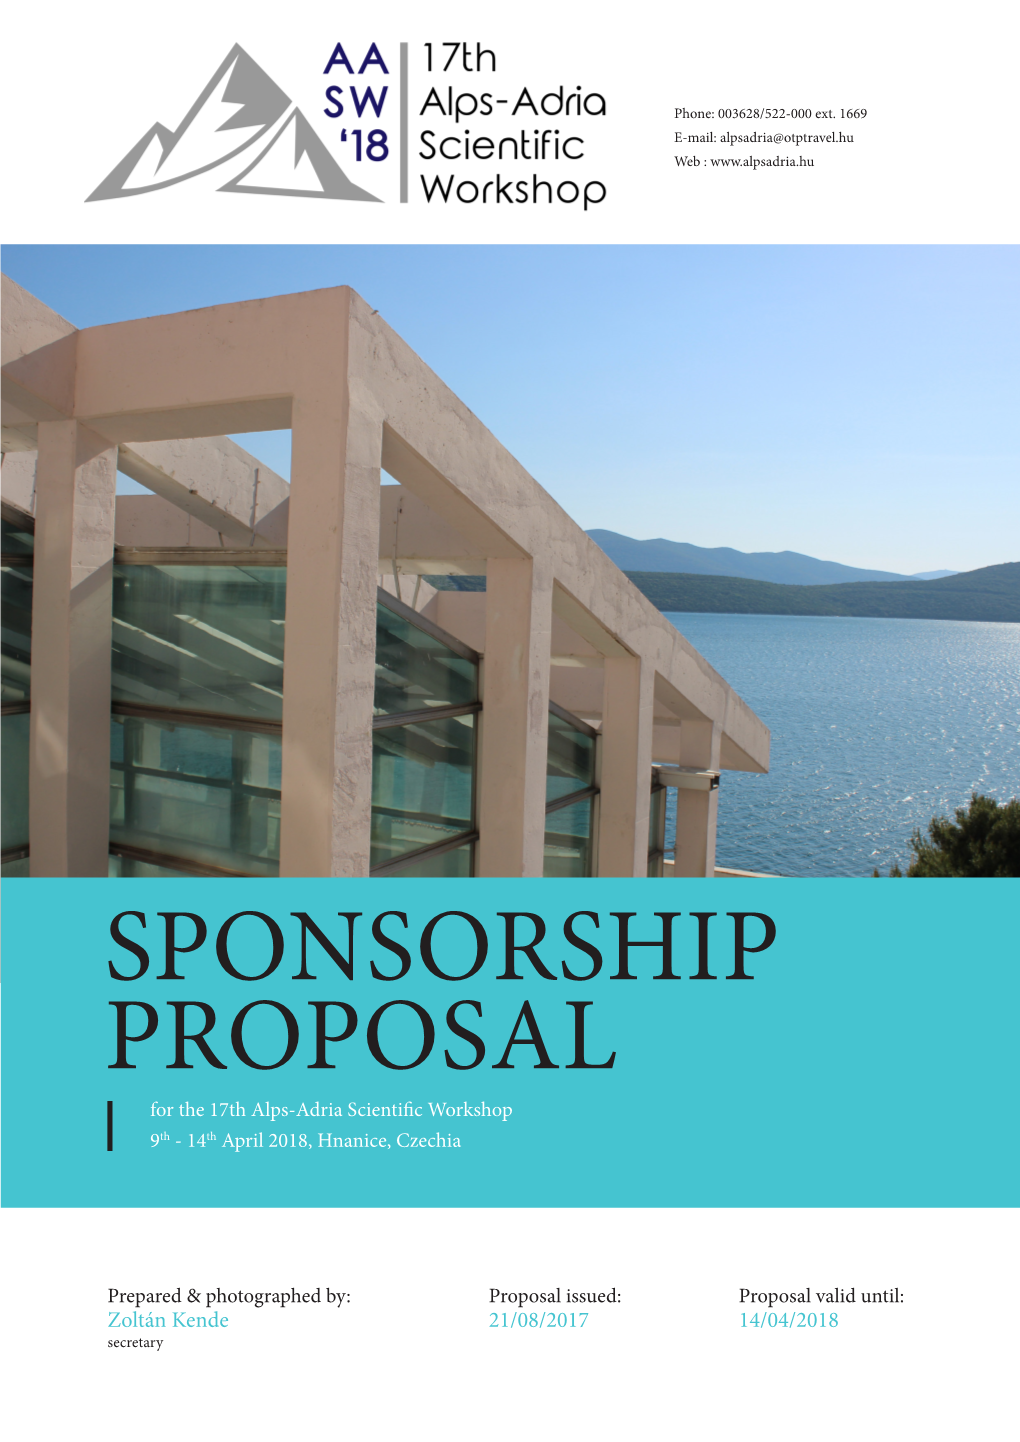 SPONSORSHIP PROPOSAL for the 17Th Alps-Adria Scientific Workshop 9Th - 14Th April 2018, Hnanice, Czechia